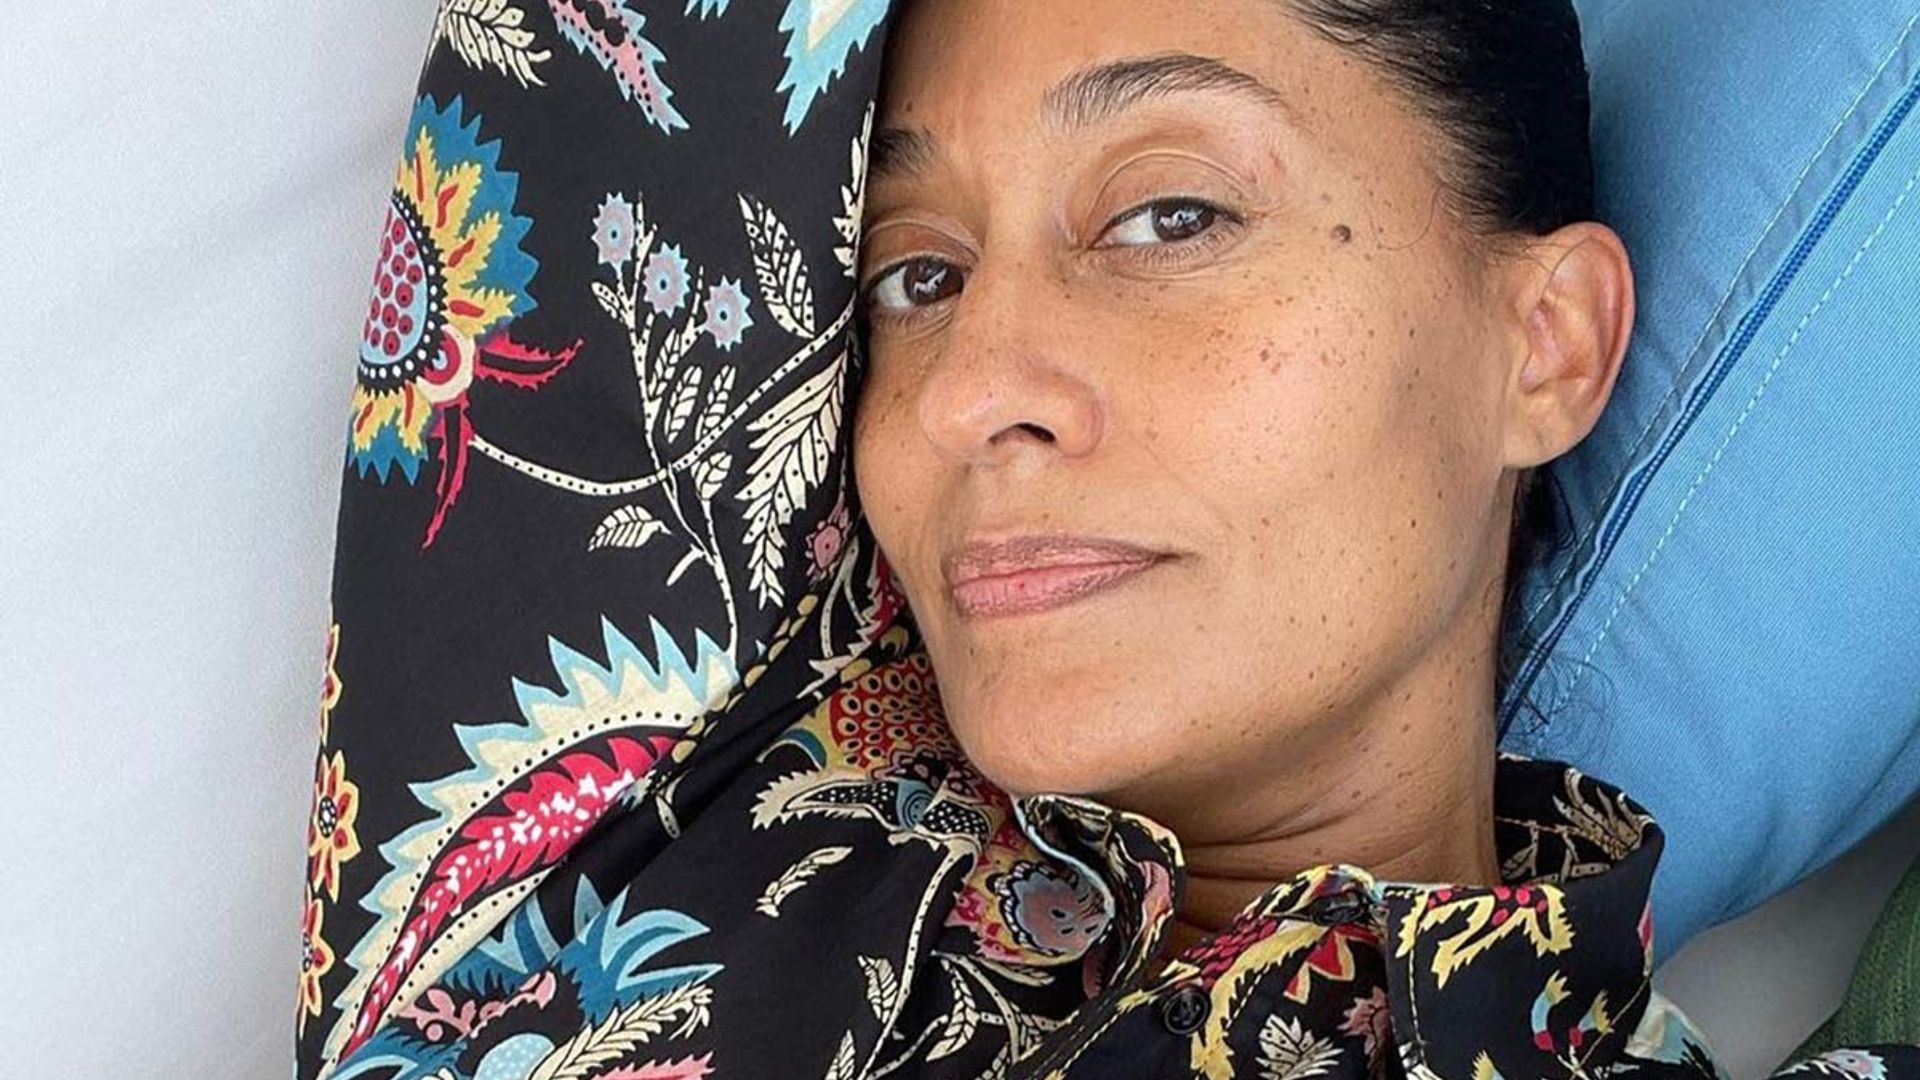 Tracee Ellis Ross stuns with bold new hairstyle